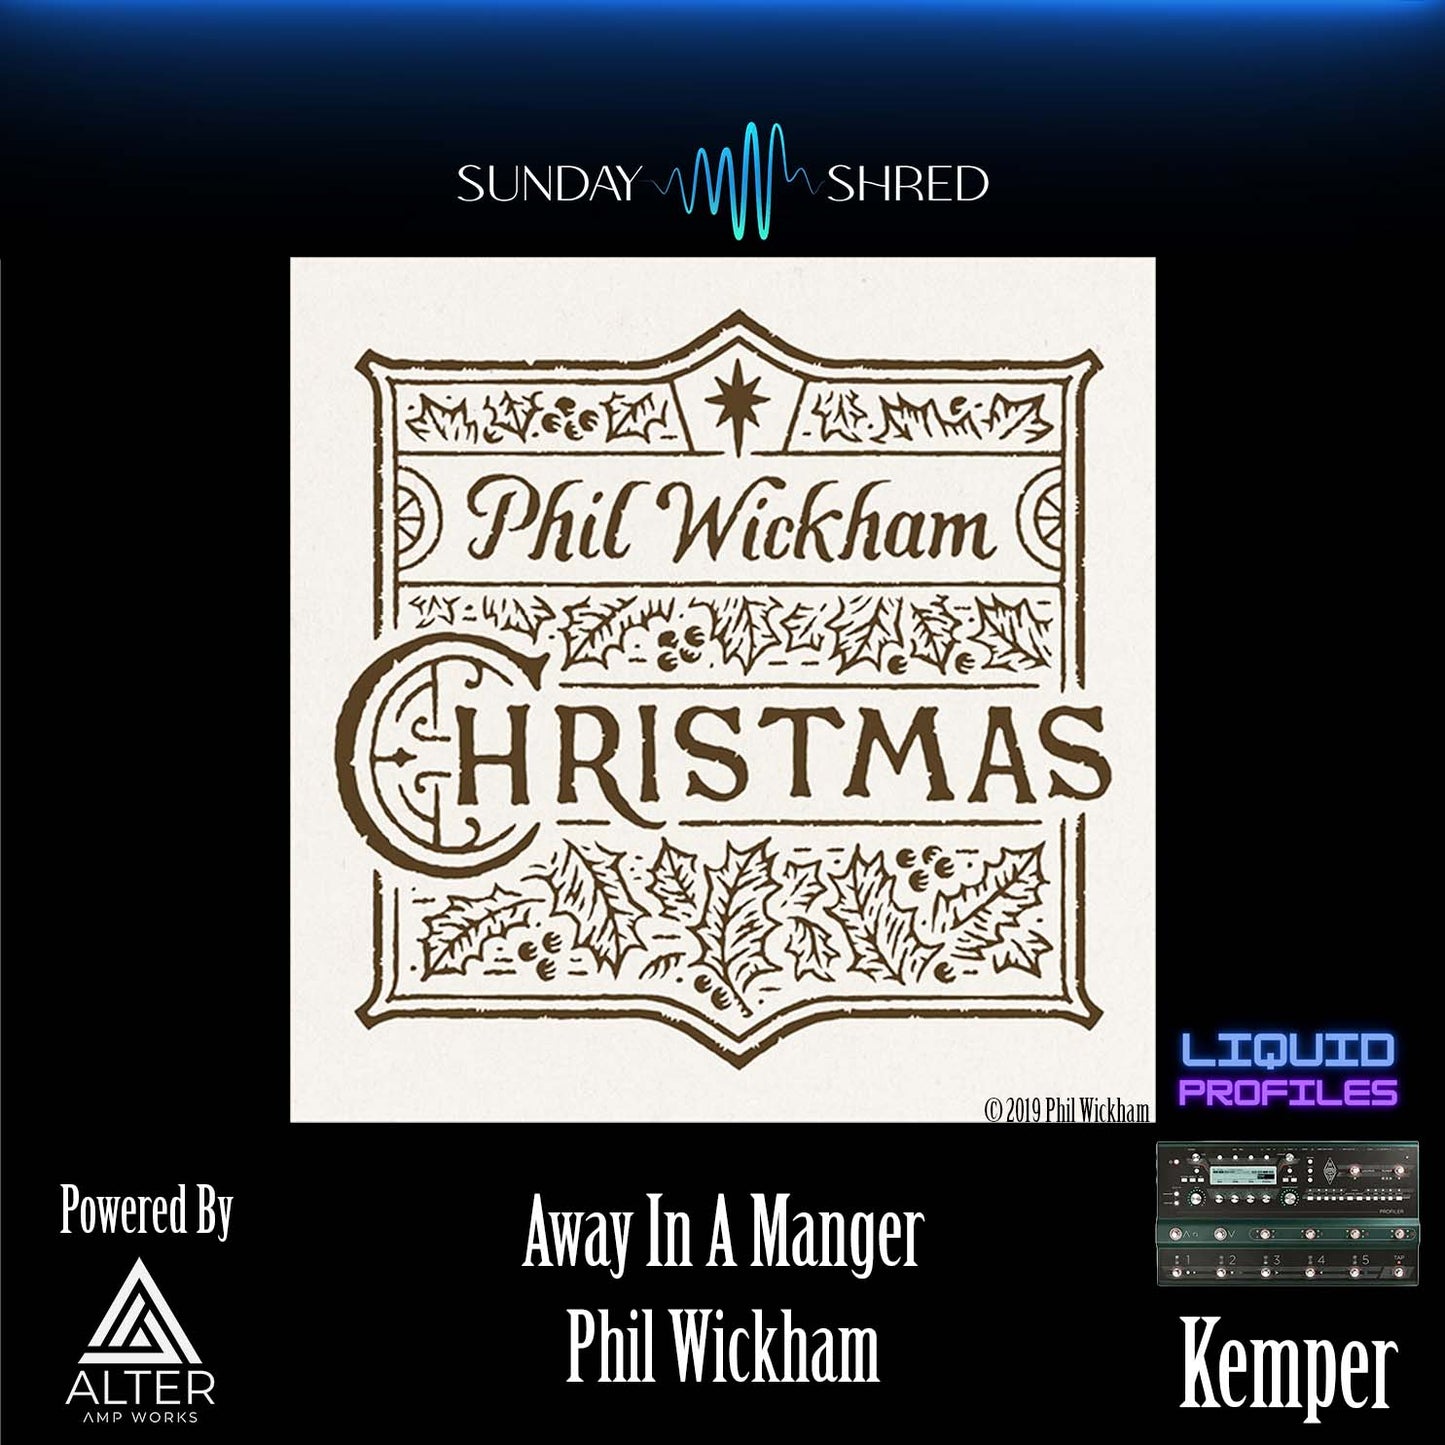 Away In A Manager - Phil Wickham - Kemper Performance